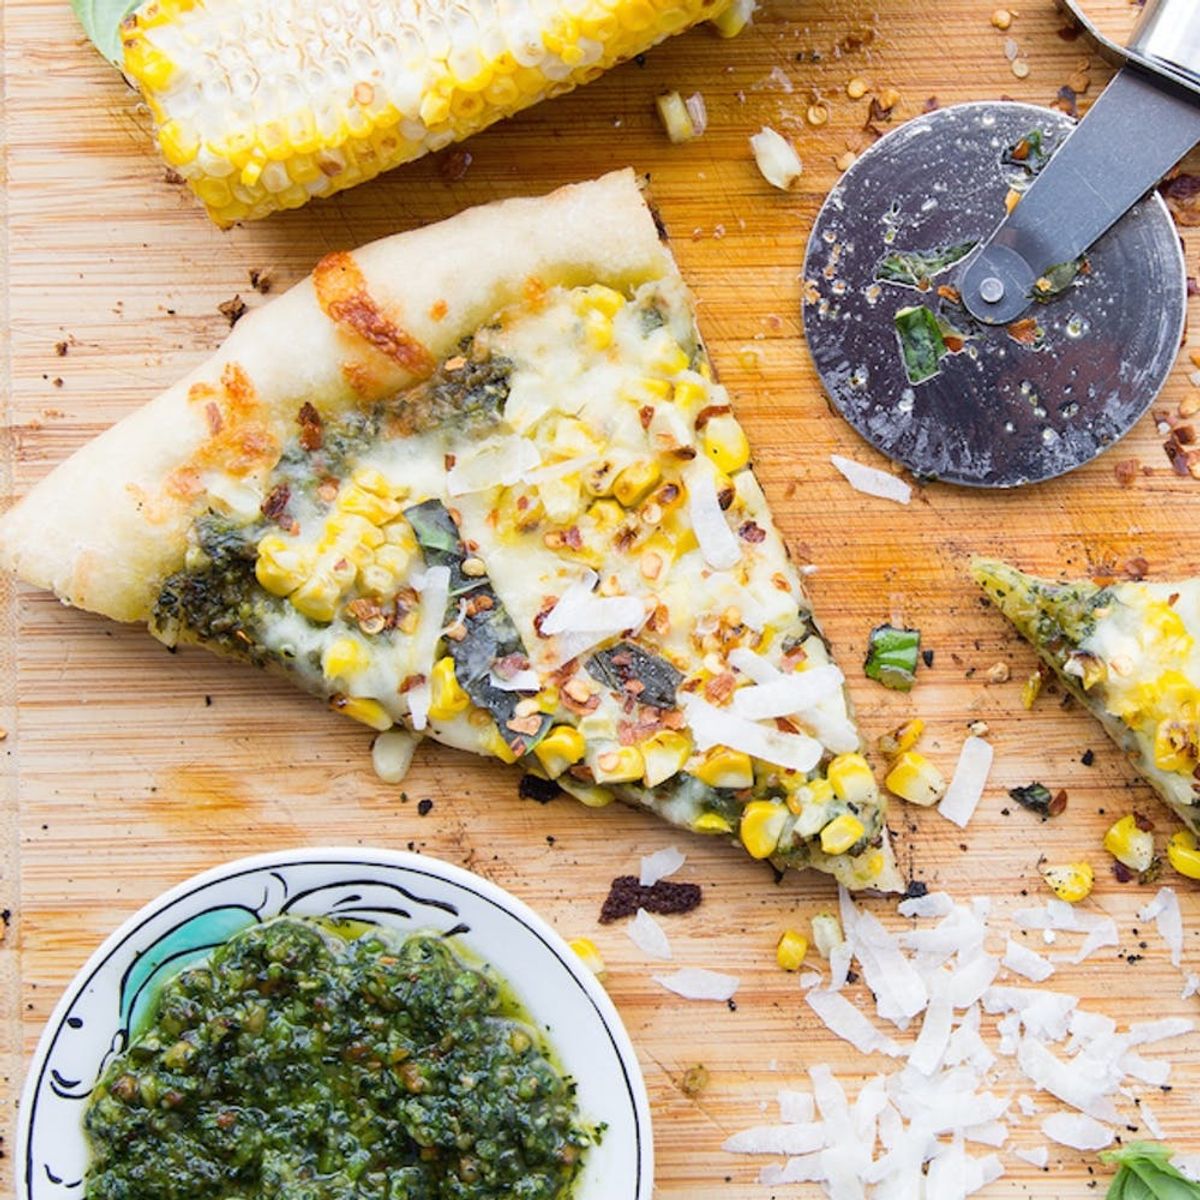 Fulfill Your Pizza Dreams With Grilled Kale Pesto + Corn Pizza